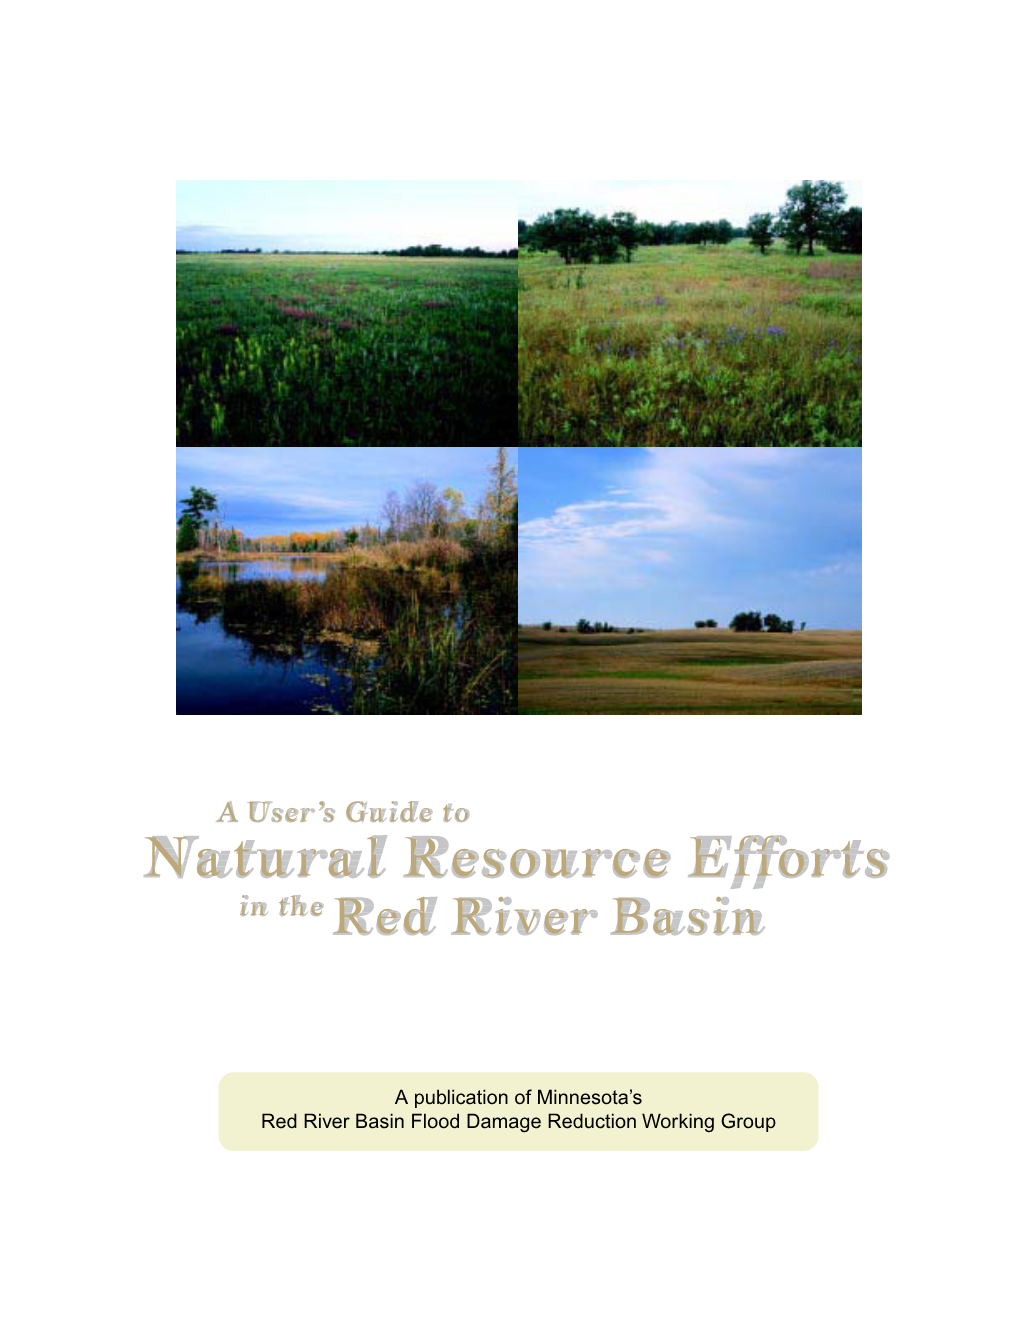 A User's Guide to Natural Resource Efforts in the Red River Basin